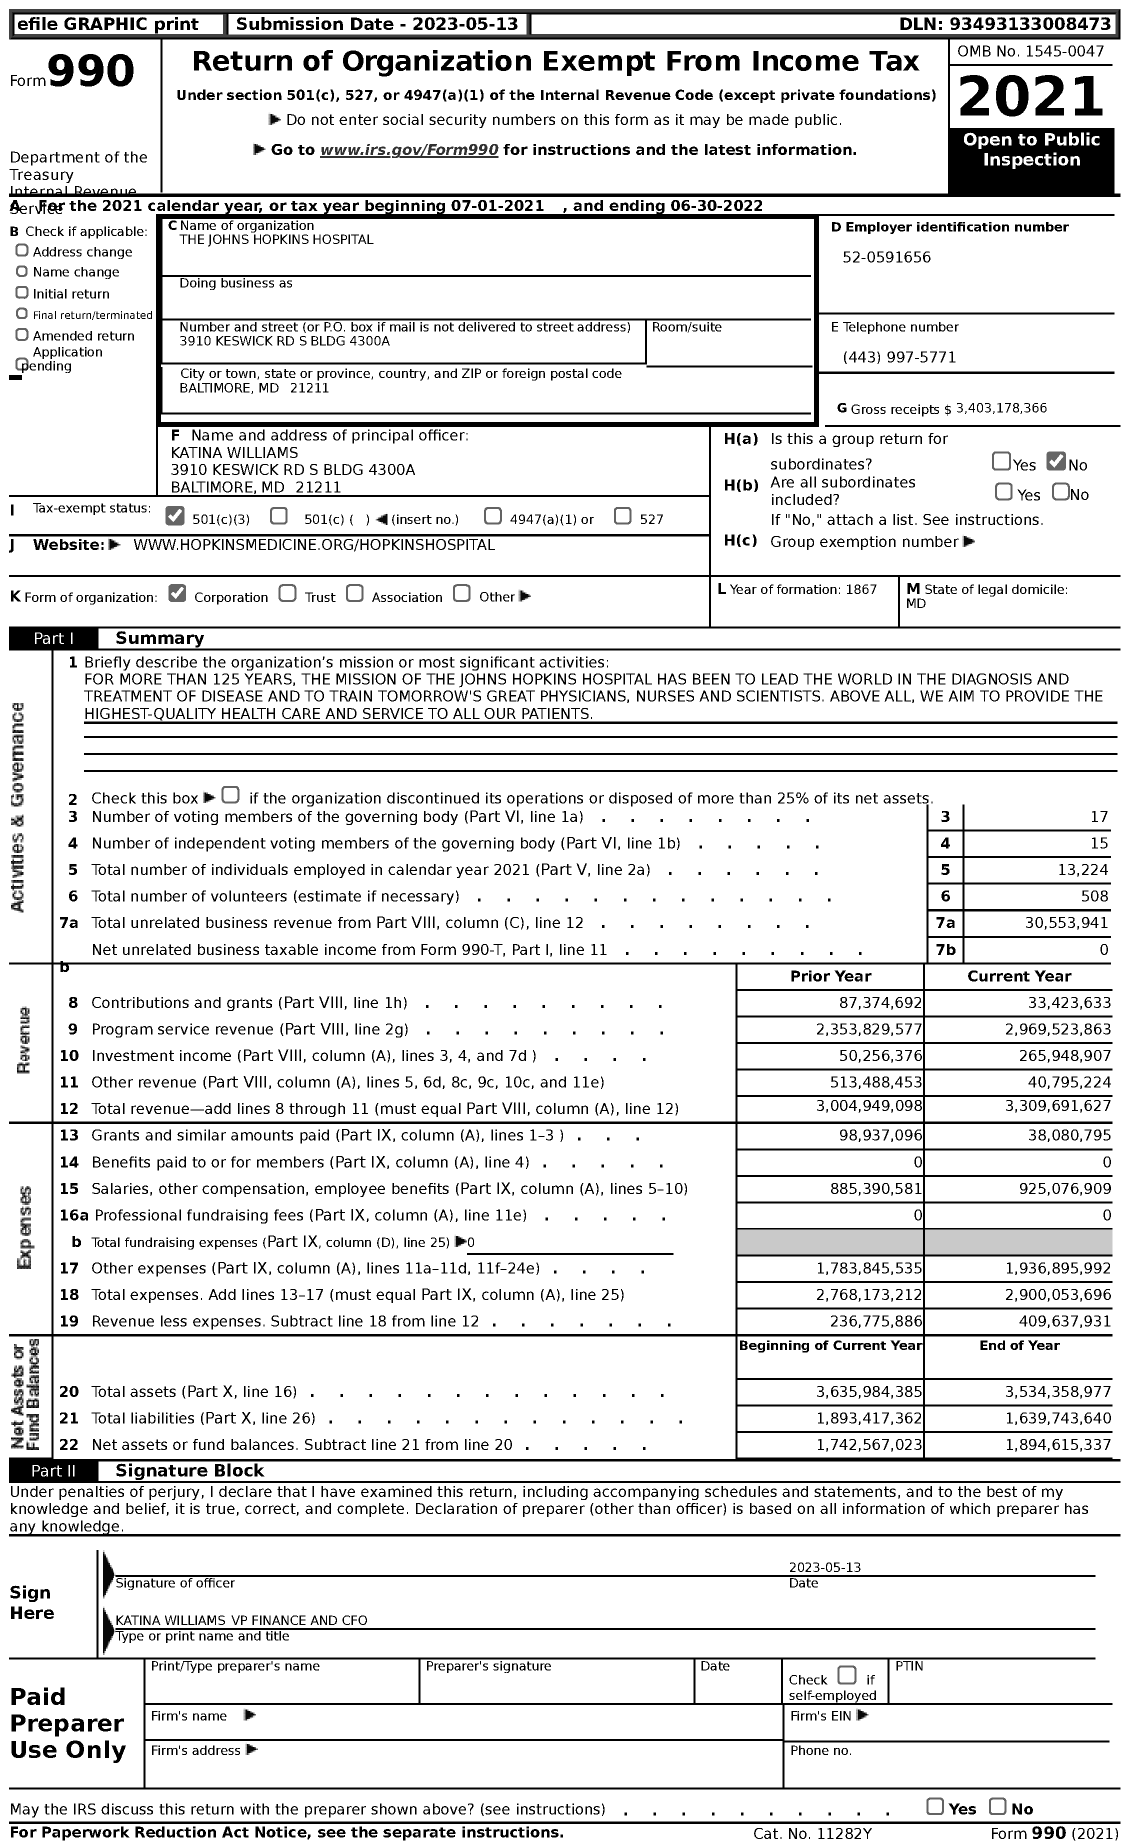 Image of first page of 2021 Form 990 for The Johns Hopkins Hospital (JHH)